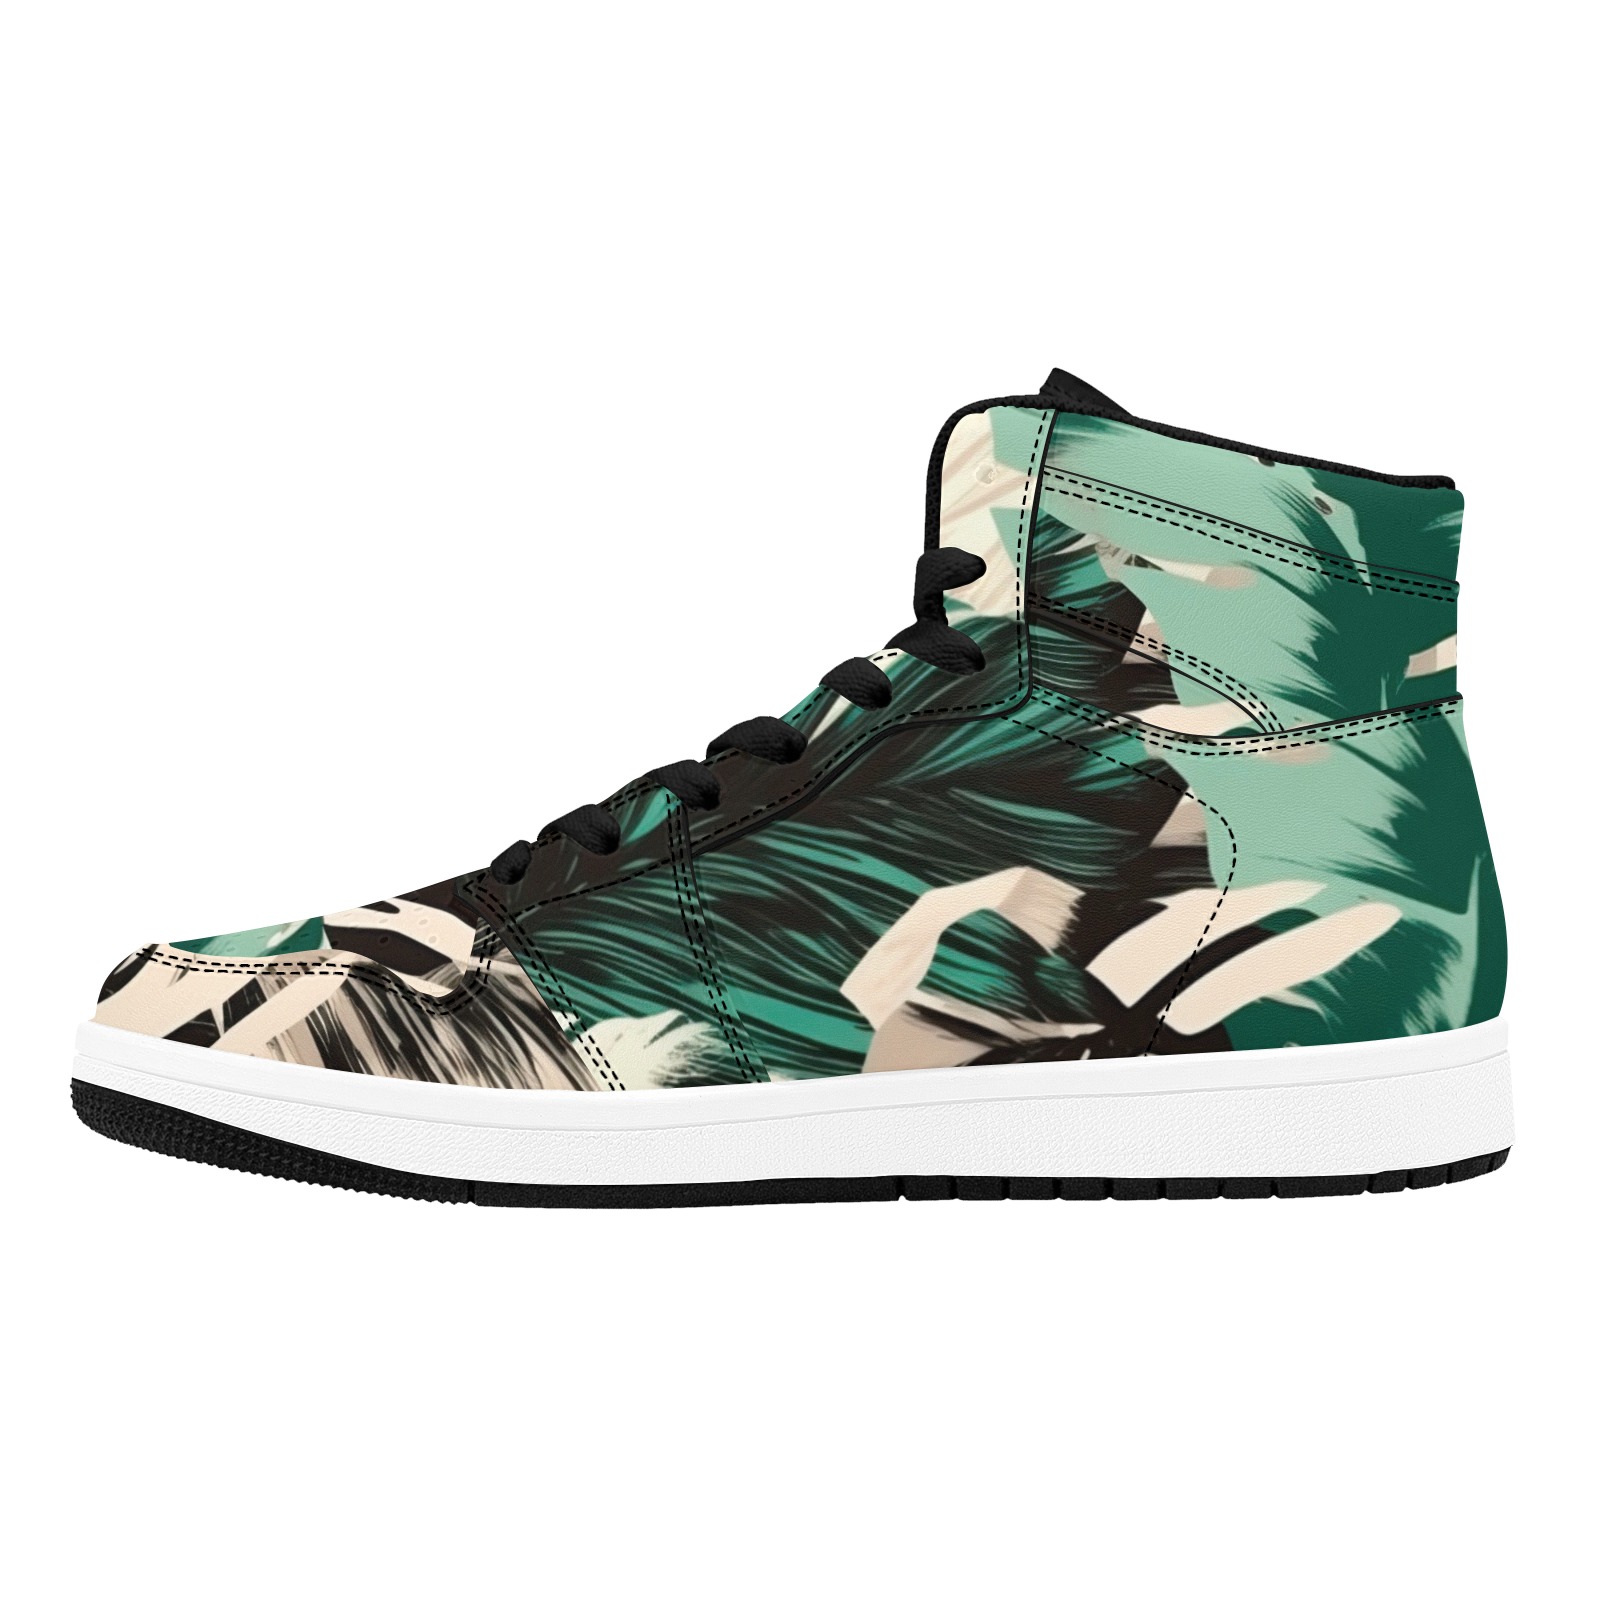 Lush wild abstract jungle-374 Men's High Top Sneakers (Model 20042)